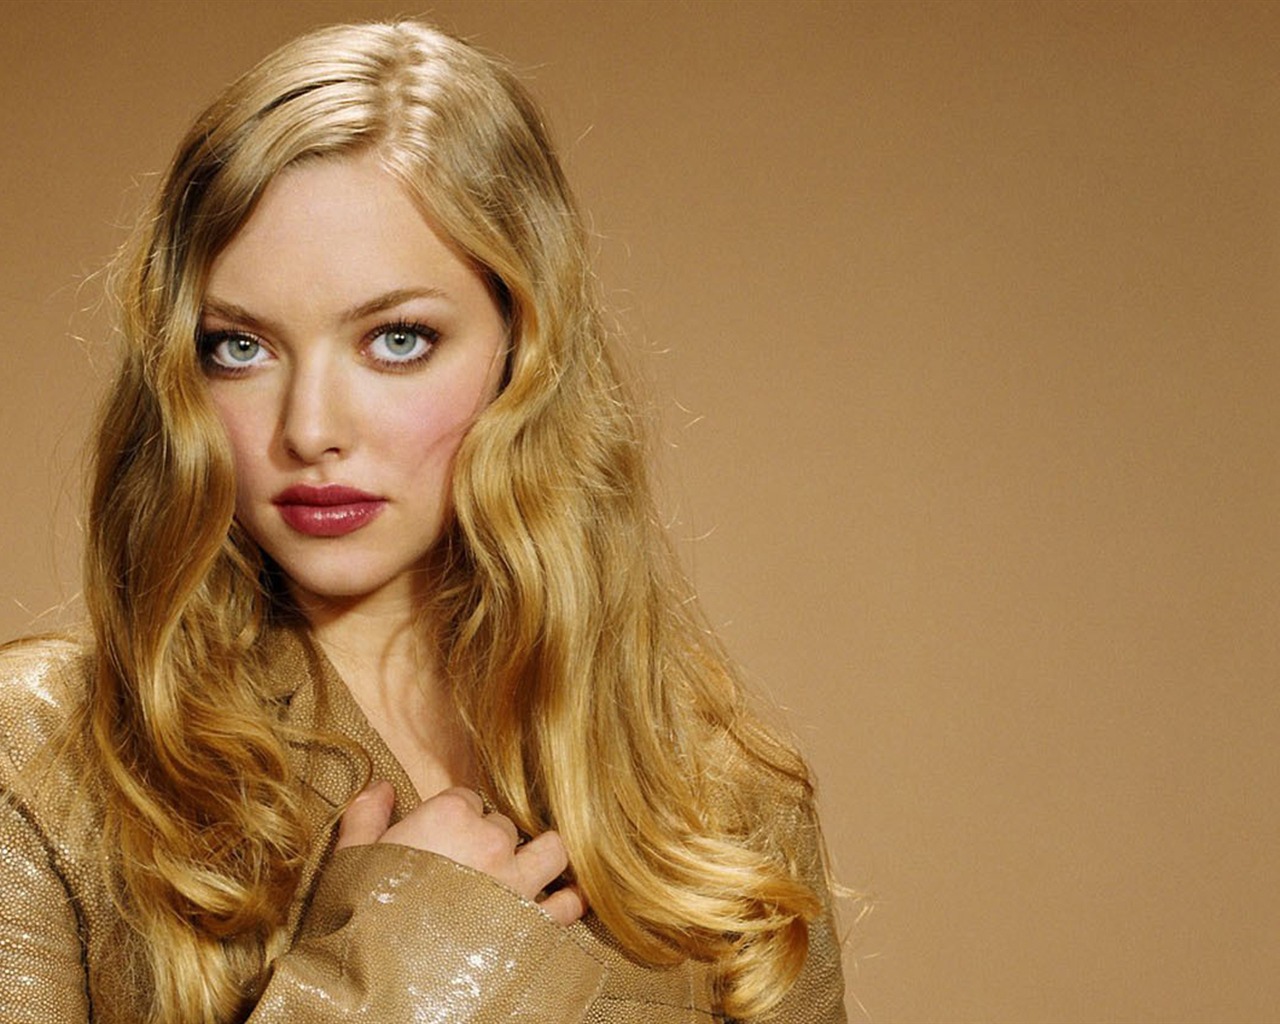 Amanda Seyfried #016 - 1280x1024 Wallpapers Pictures Photos Images